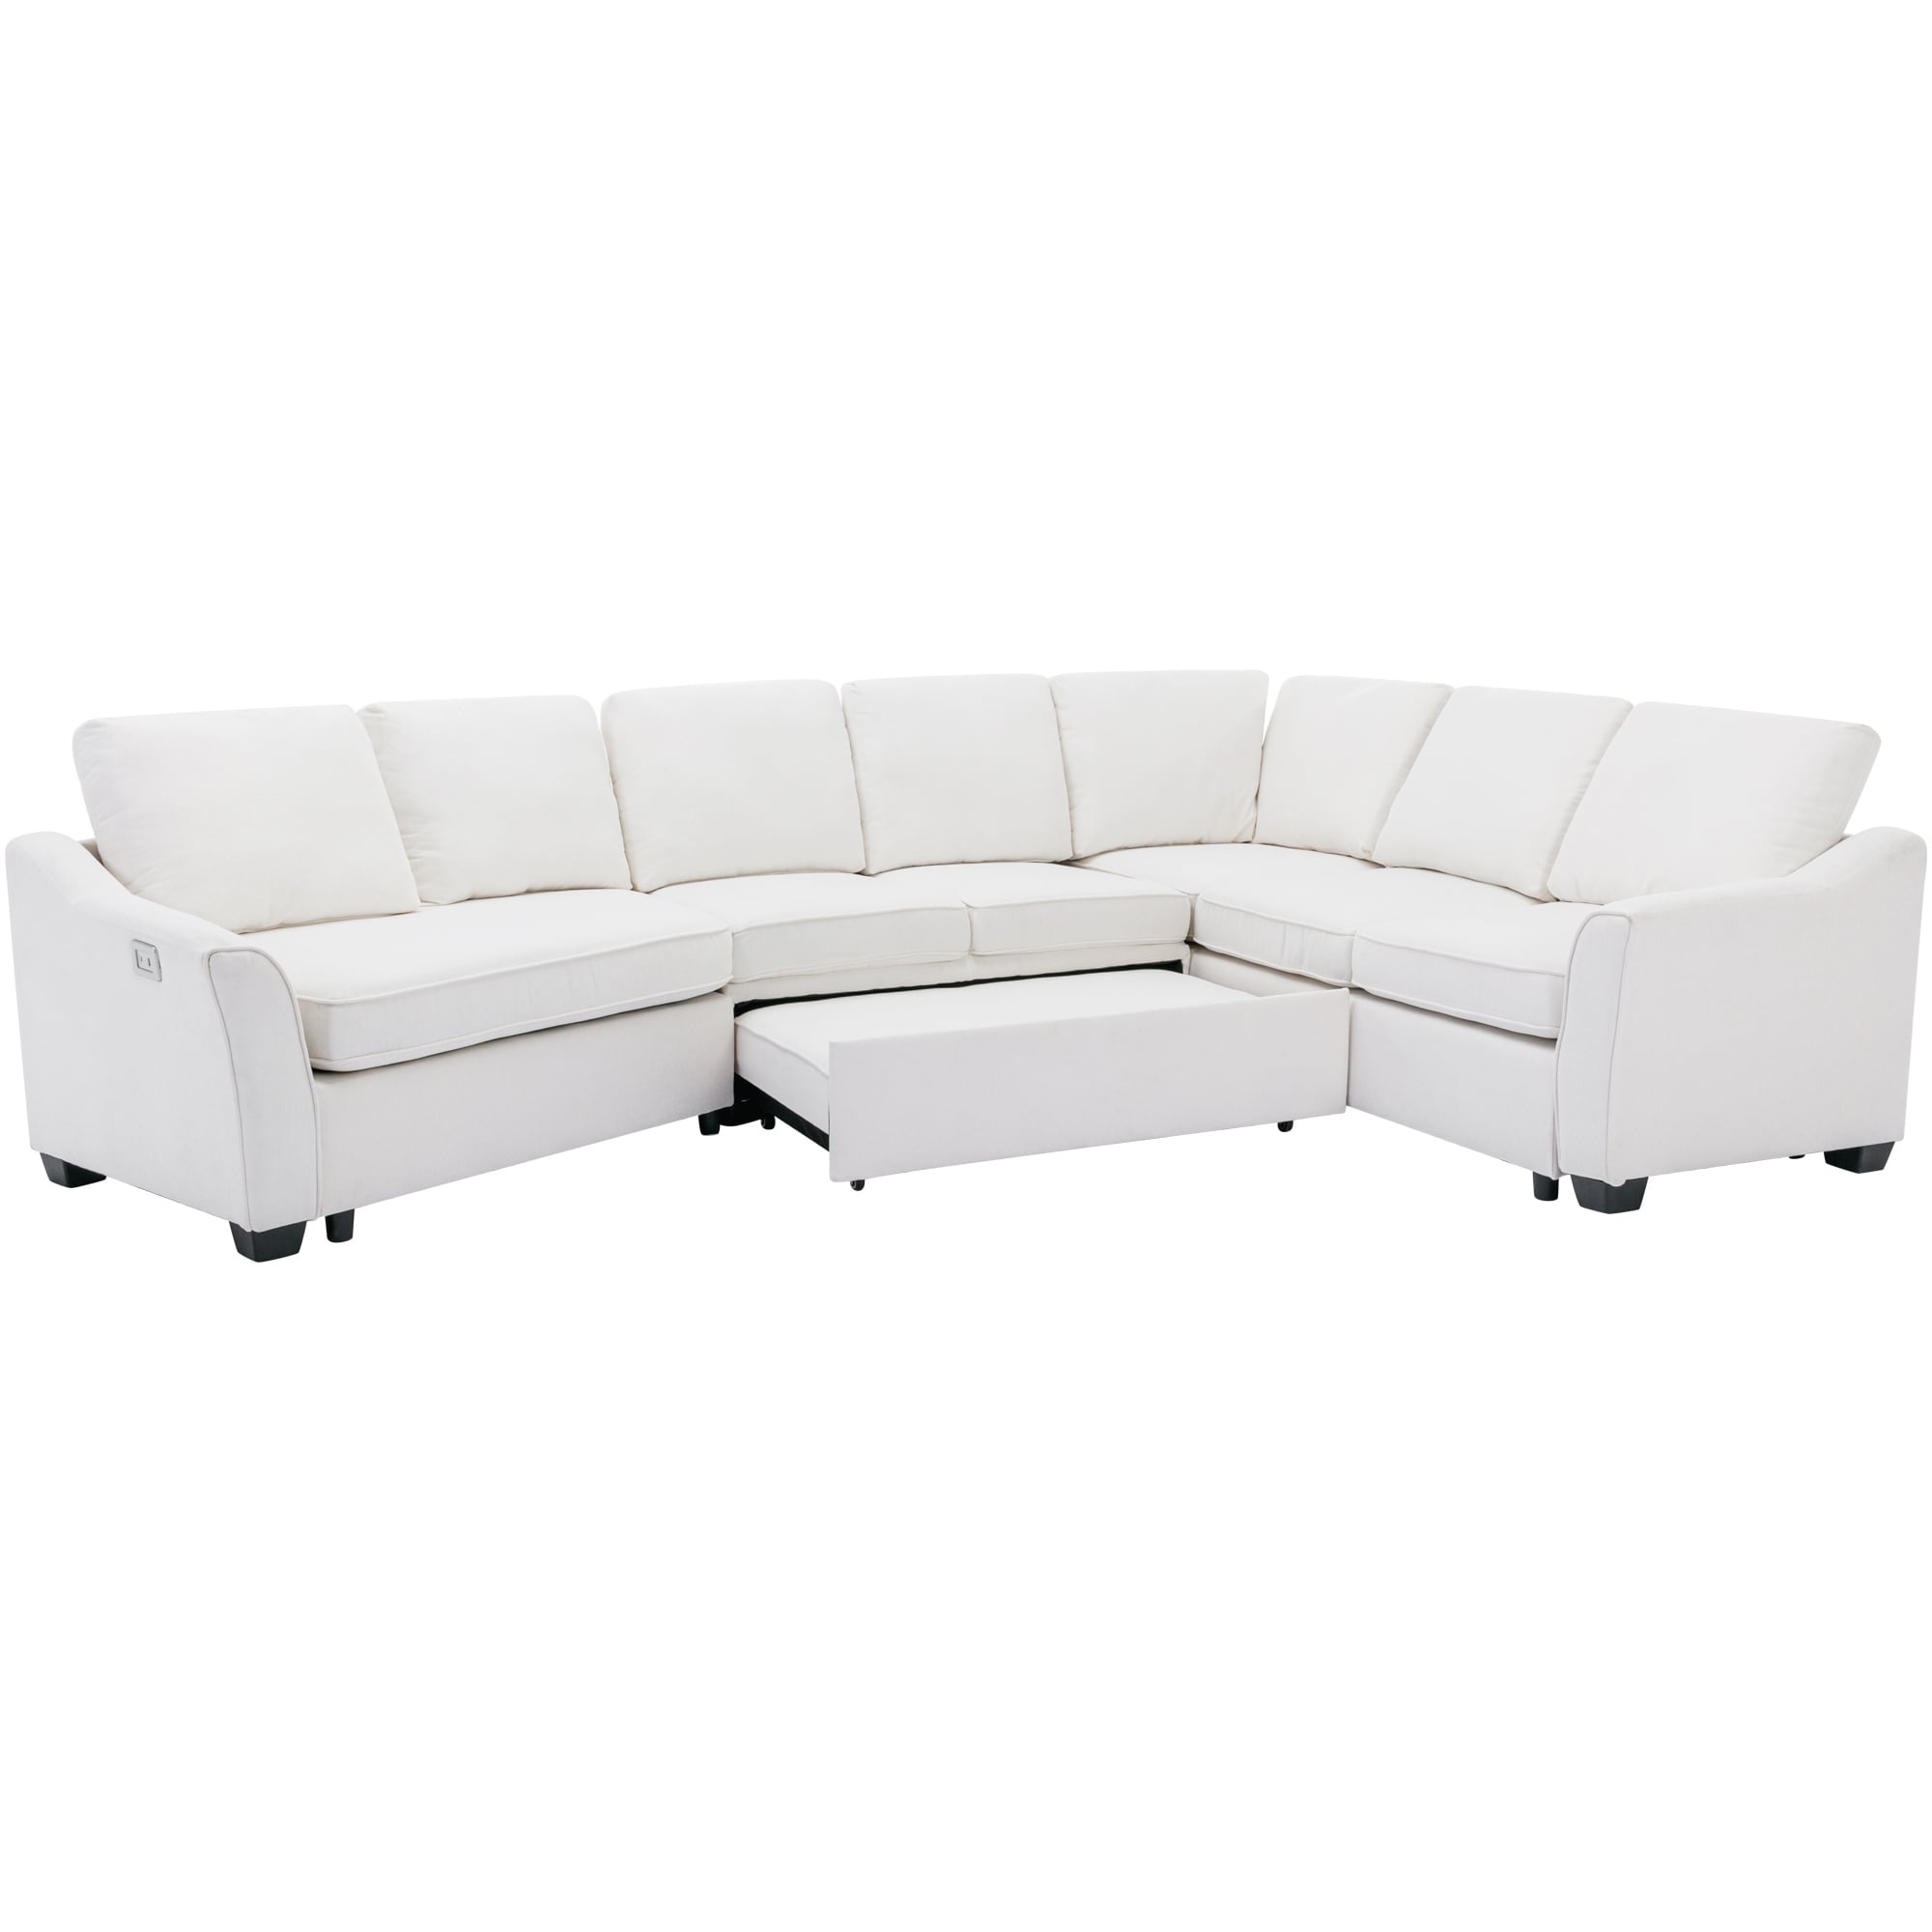 Modular Upholstered Sectional Sofa with USB Charge Ports, 4-Seater - Beige Chenille